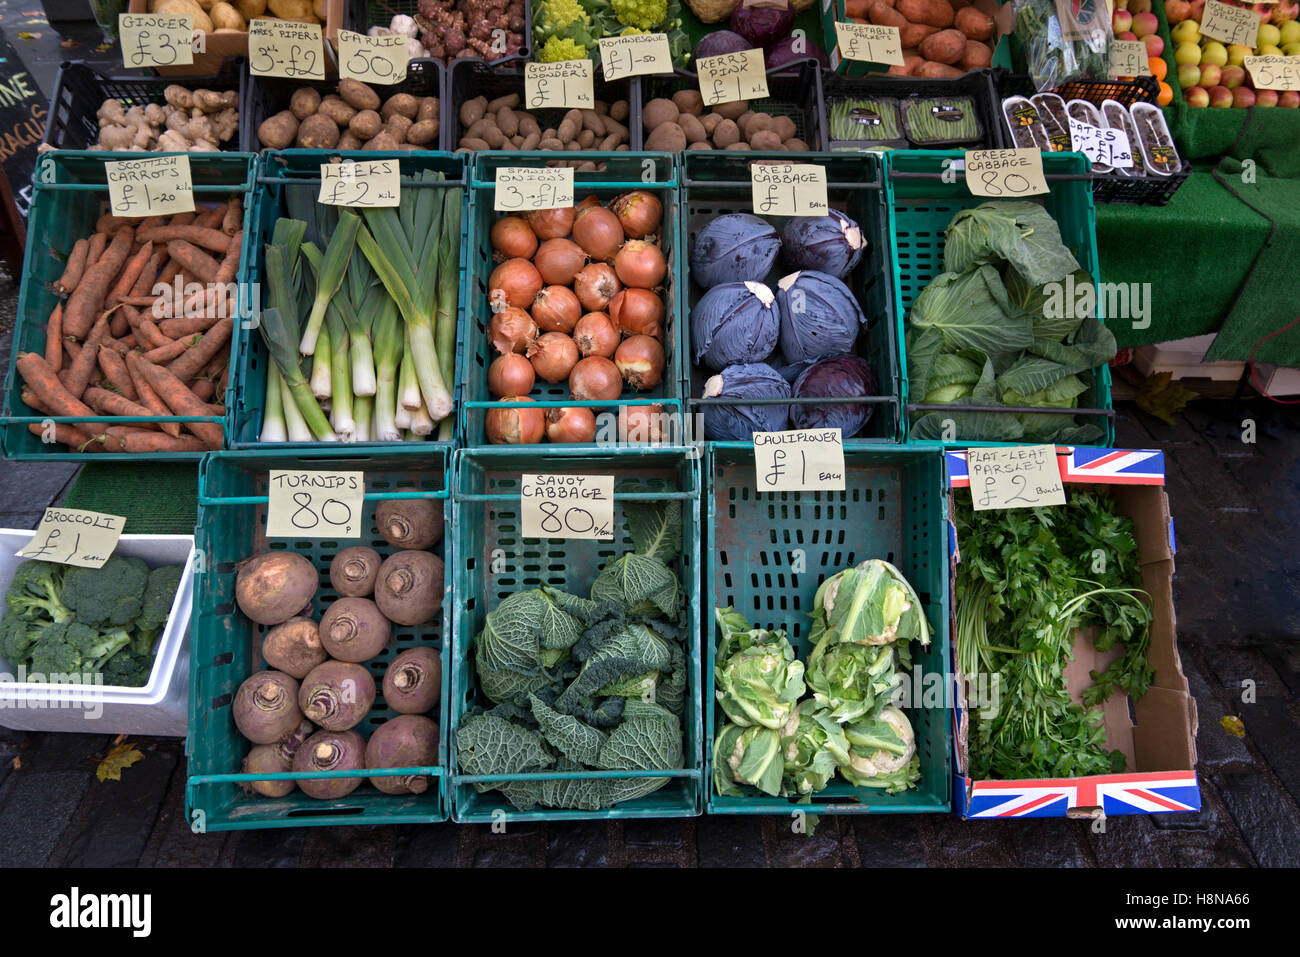 A selection of winter vegetables on sale at an outdoor market stall in the Grassmarket, Edinburgh, UK. Stock Photo